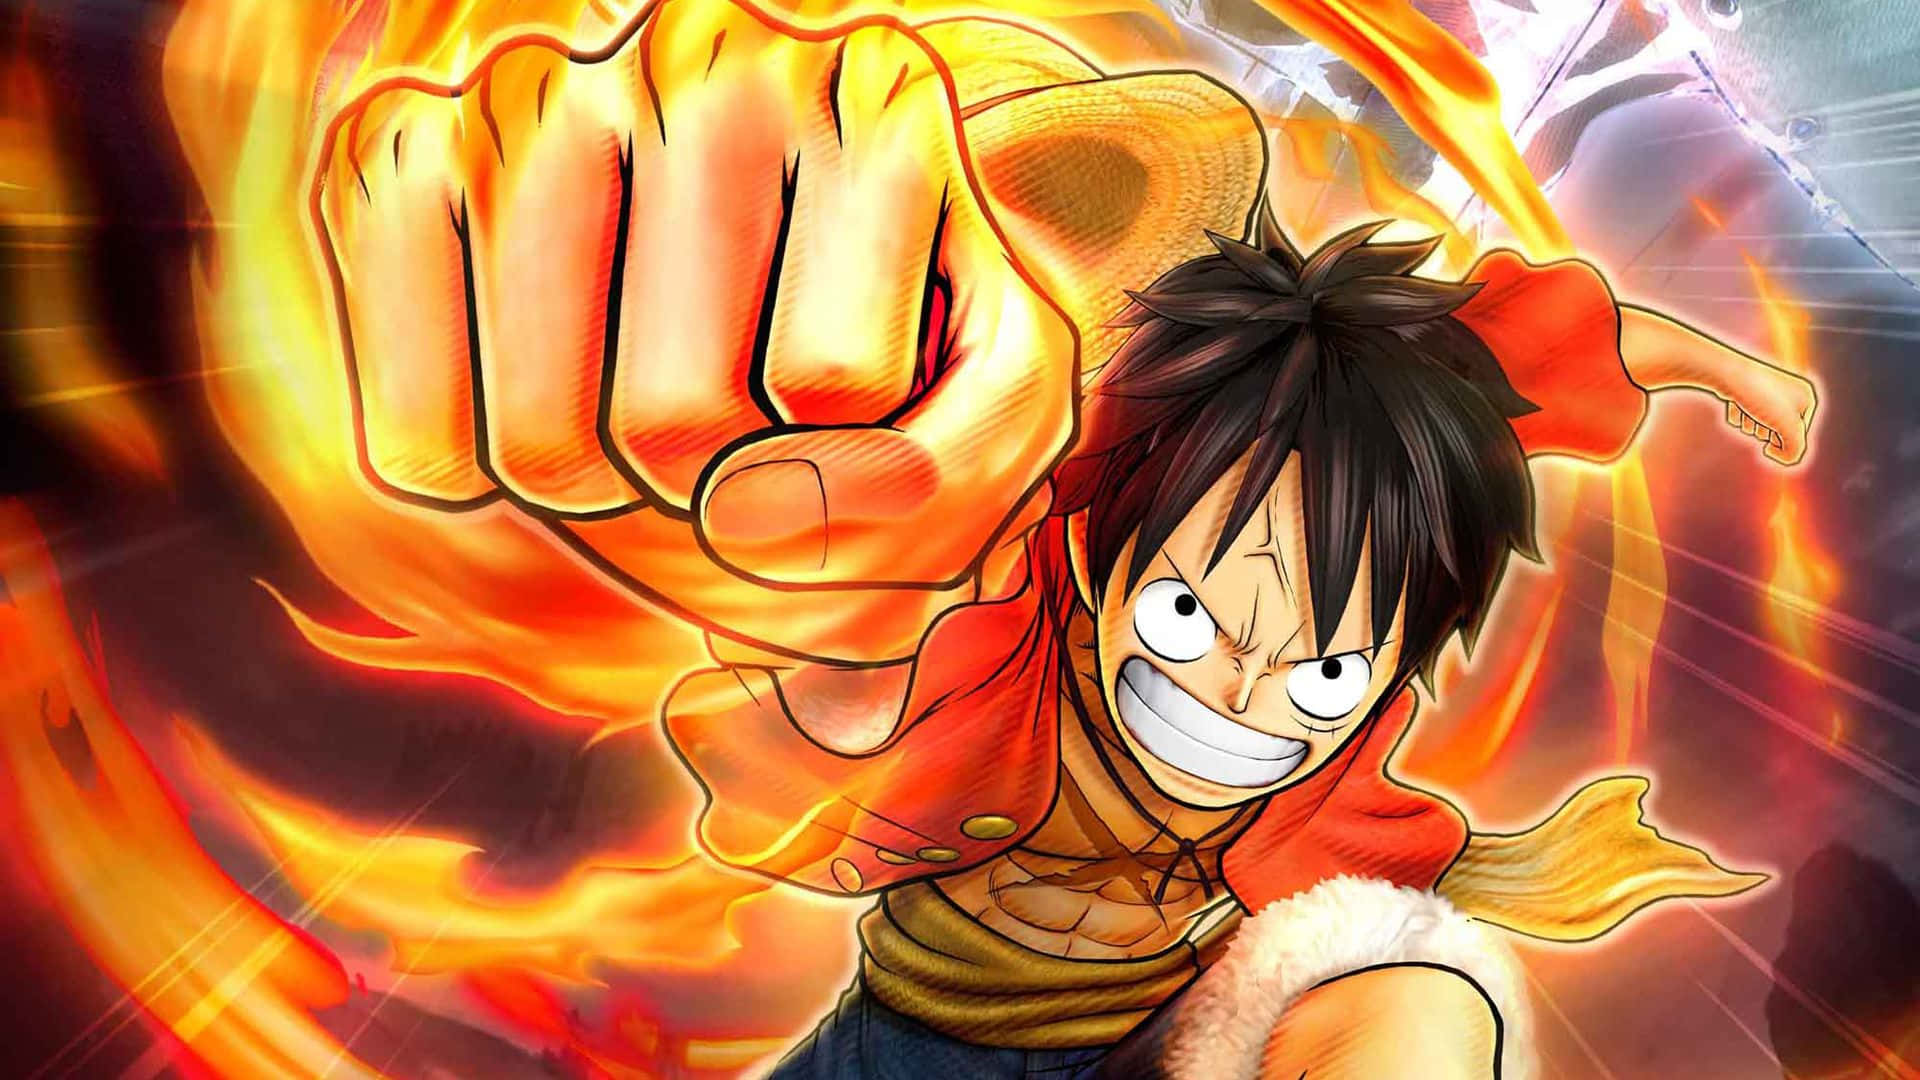 One Piece - A Character With A Fist In His Hand